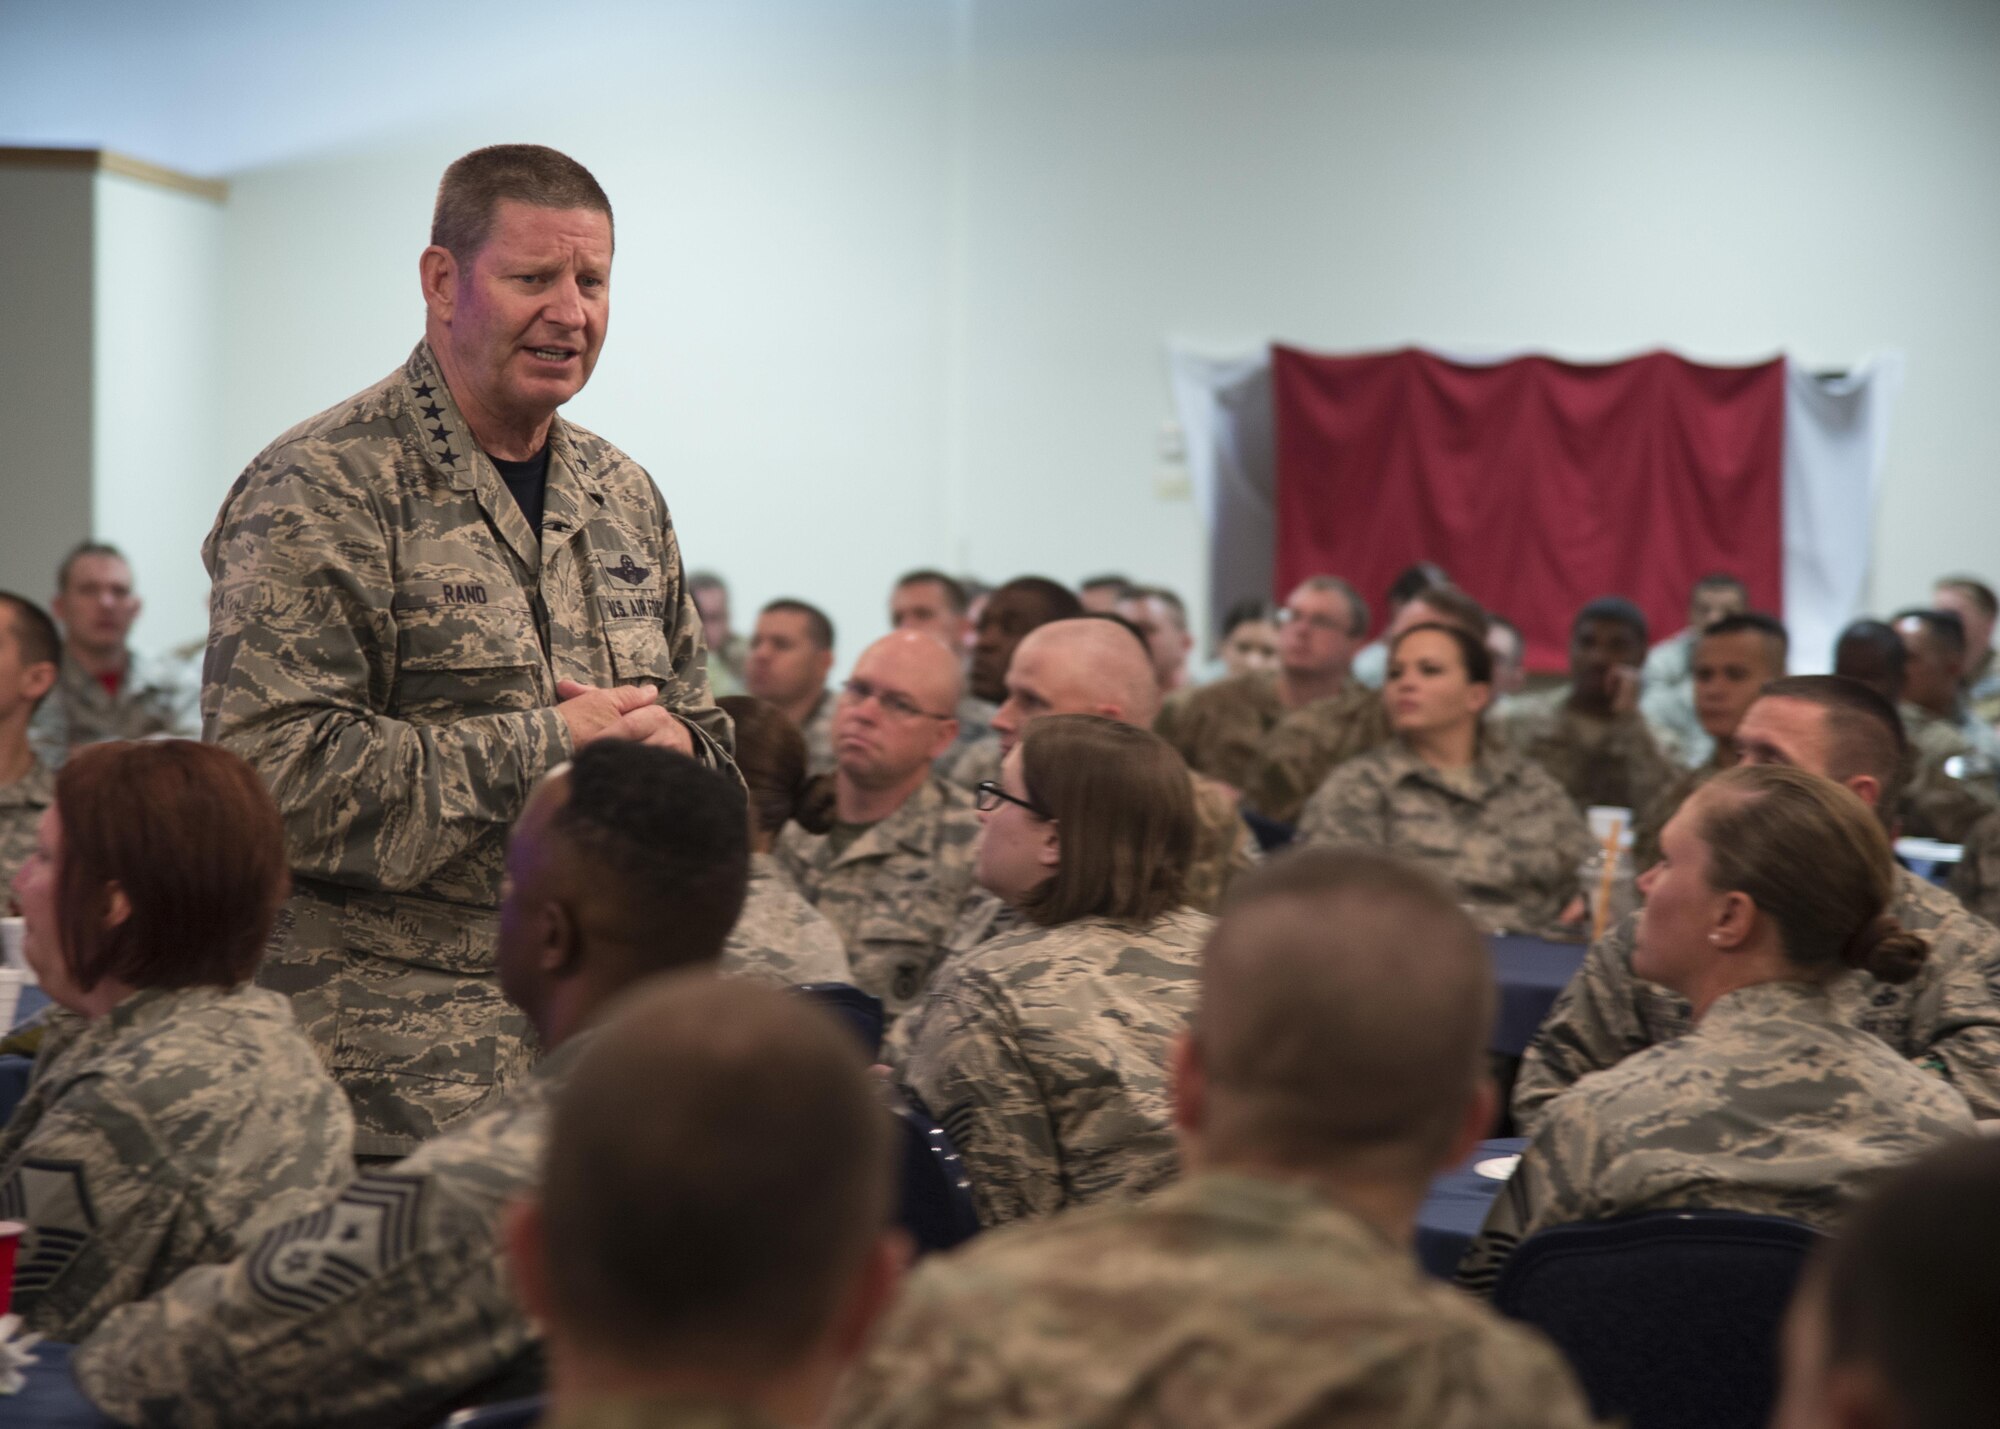 Gen. Robin Rand, AFGSC commander, talks with 90th Missile Wing Airmen about the importance of diversity, respect and camaraderie during an Enlisted Professional Development lunch, July 22, 2016, at F.E. Warren AFB, Wyo. Earlier that morning, Rand spoke with first-term Airmen about adhering to the core values. (U.S. Air Force photo by Senior Airman Malcolm Mayfield)